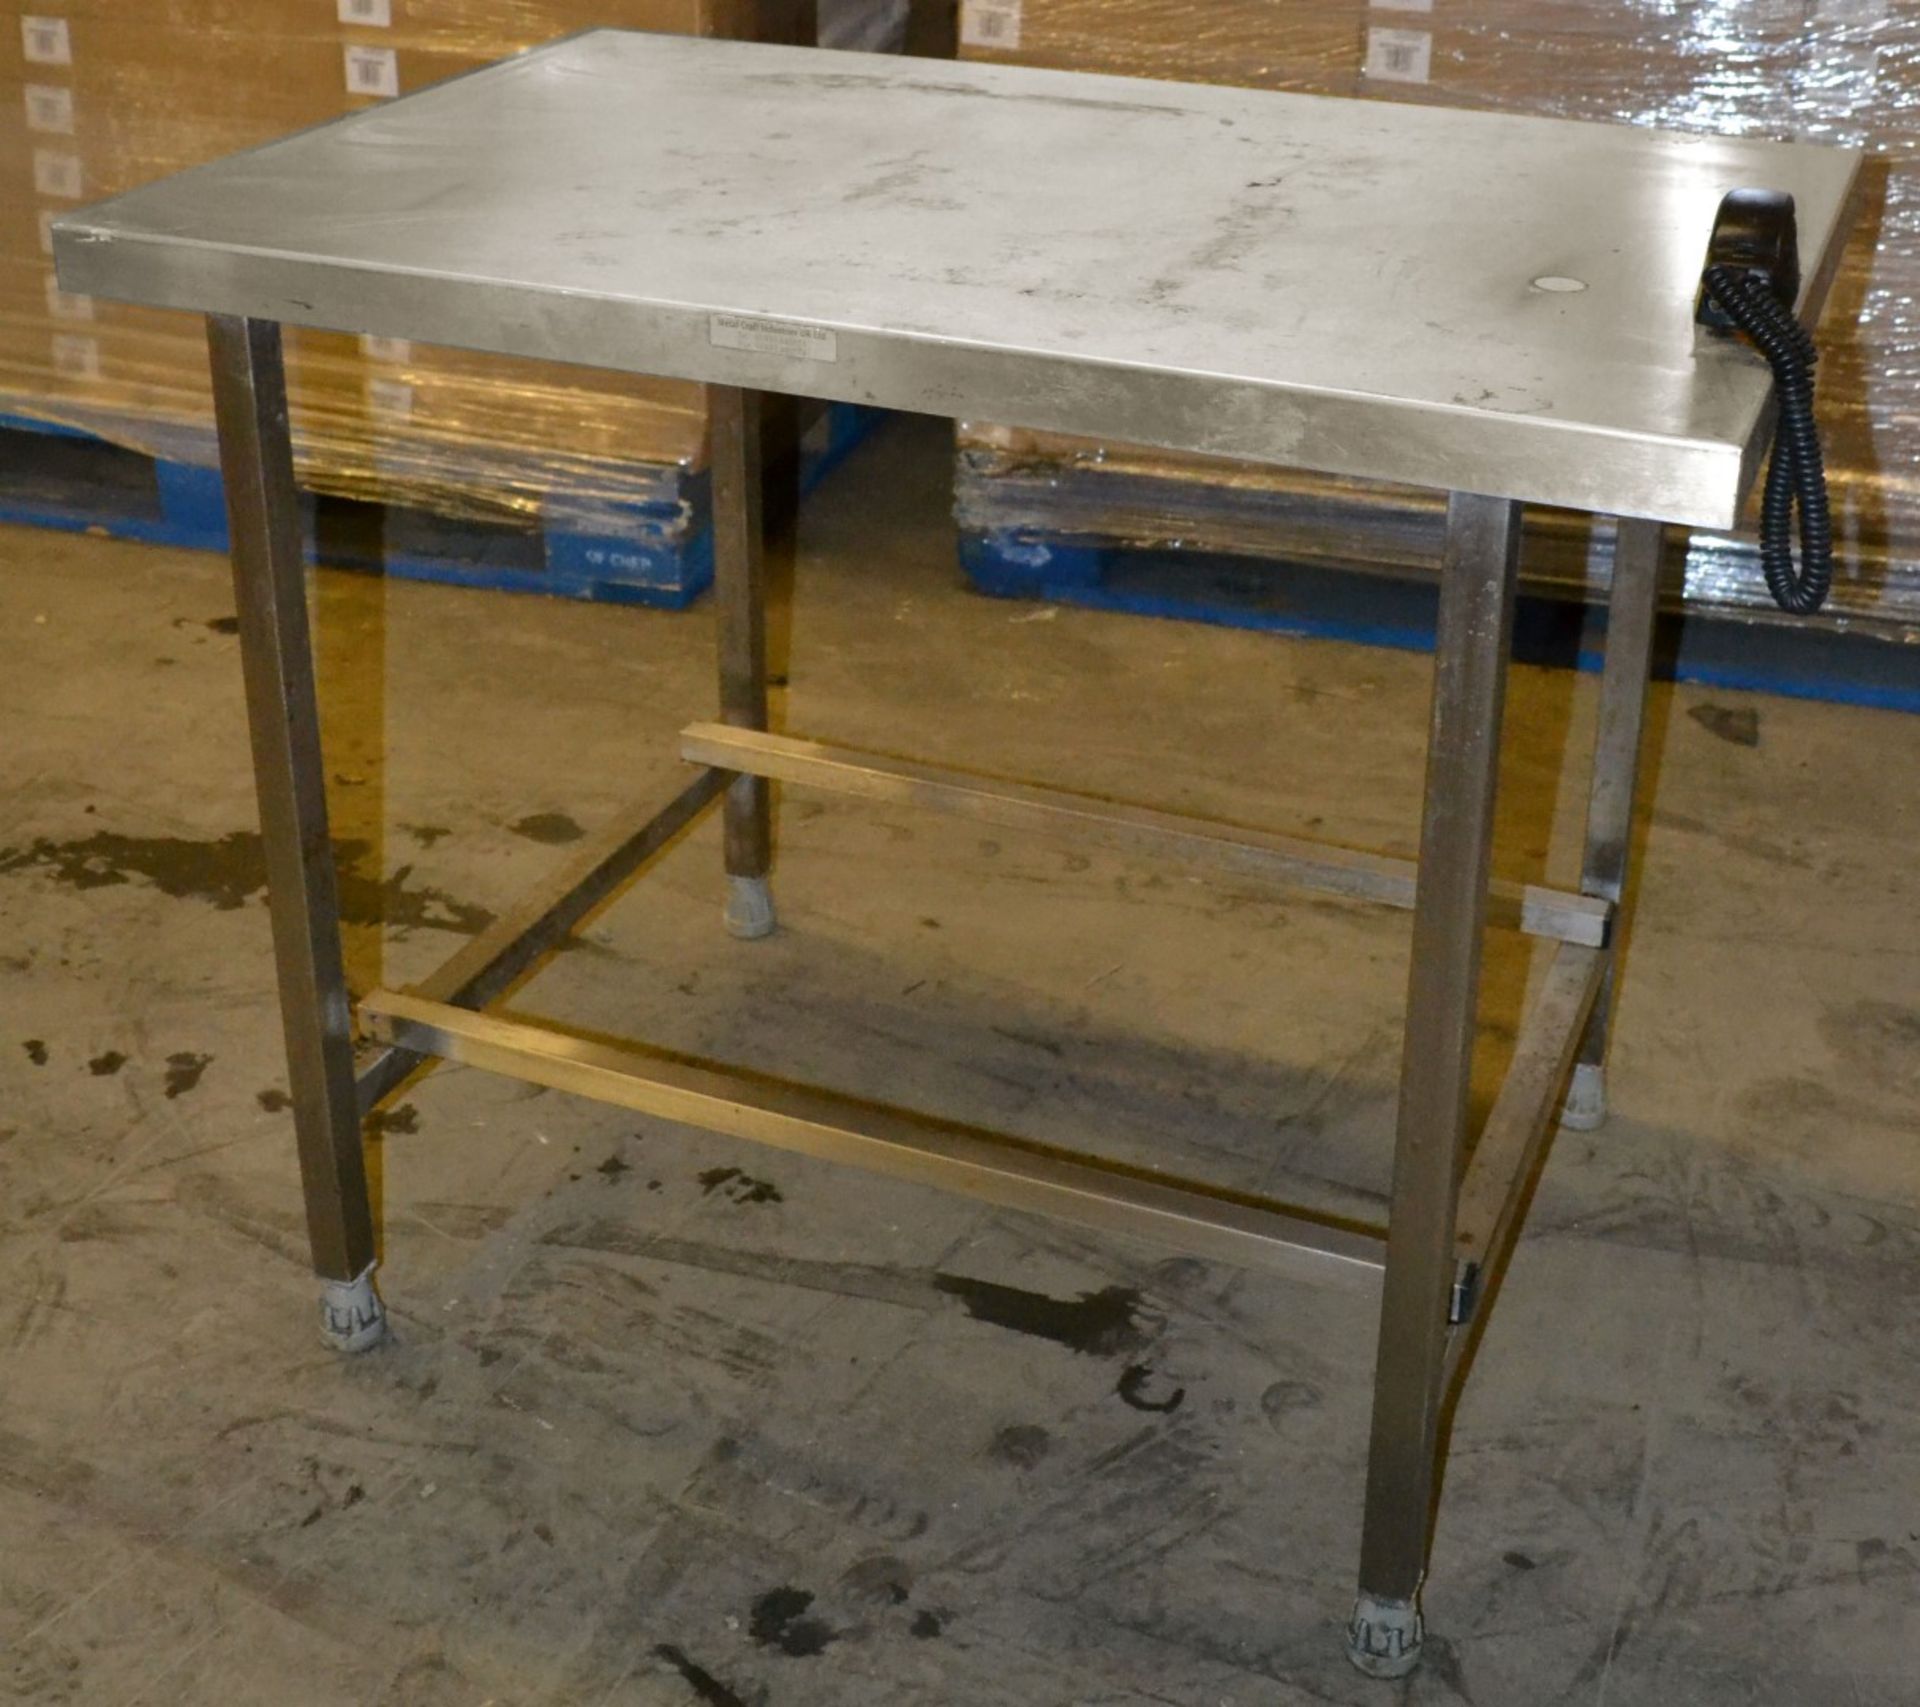 1 x Stainless Steel Prep Table With S3 Security Tag Device - Dimensions: 93 x 61 x 75cm - Ref: MC137 - Image 3 of 6